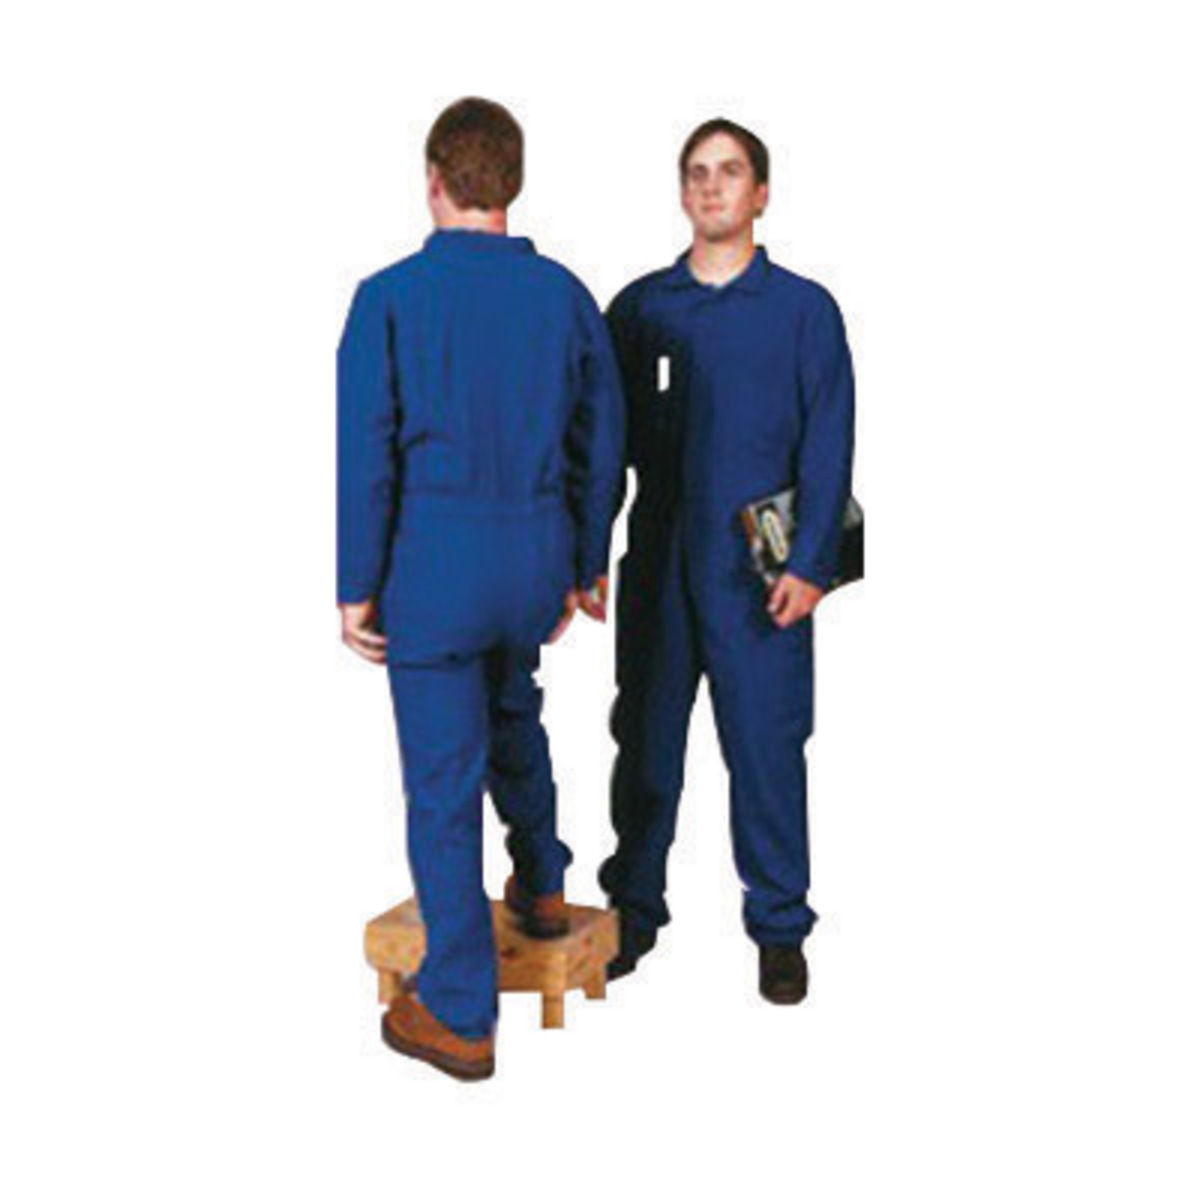 Stanco Safety Products™ 3X Royal Blue Nomex® IIIA Arc Rated Flame Resistant Coveralls With Concealed 2-Way Front Zipper Closure